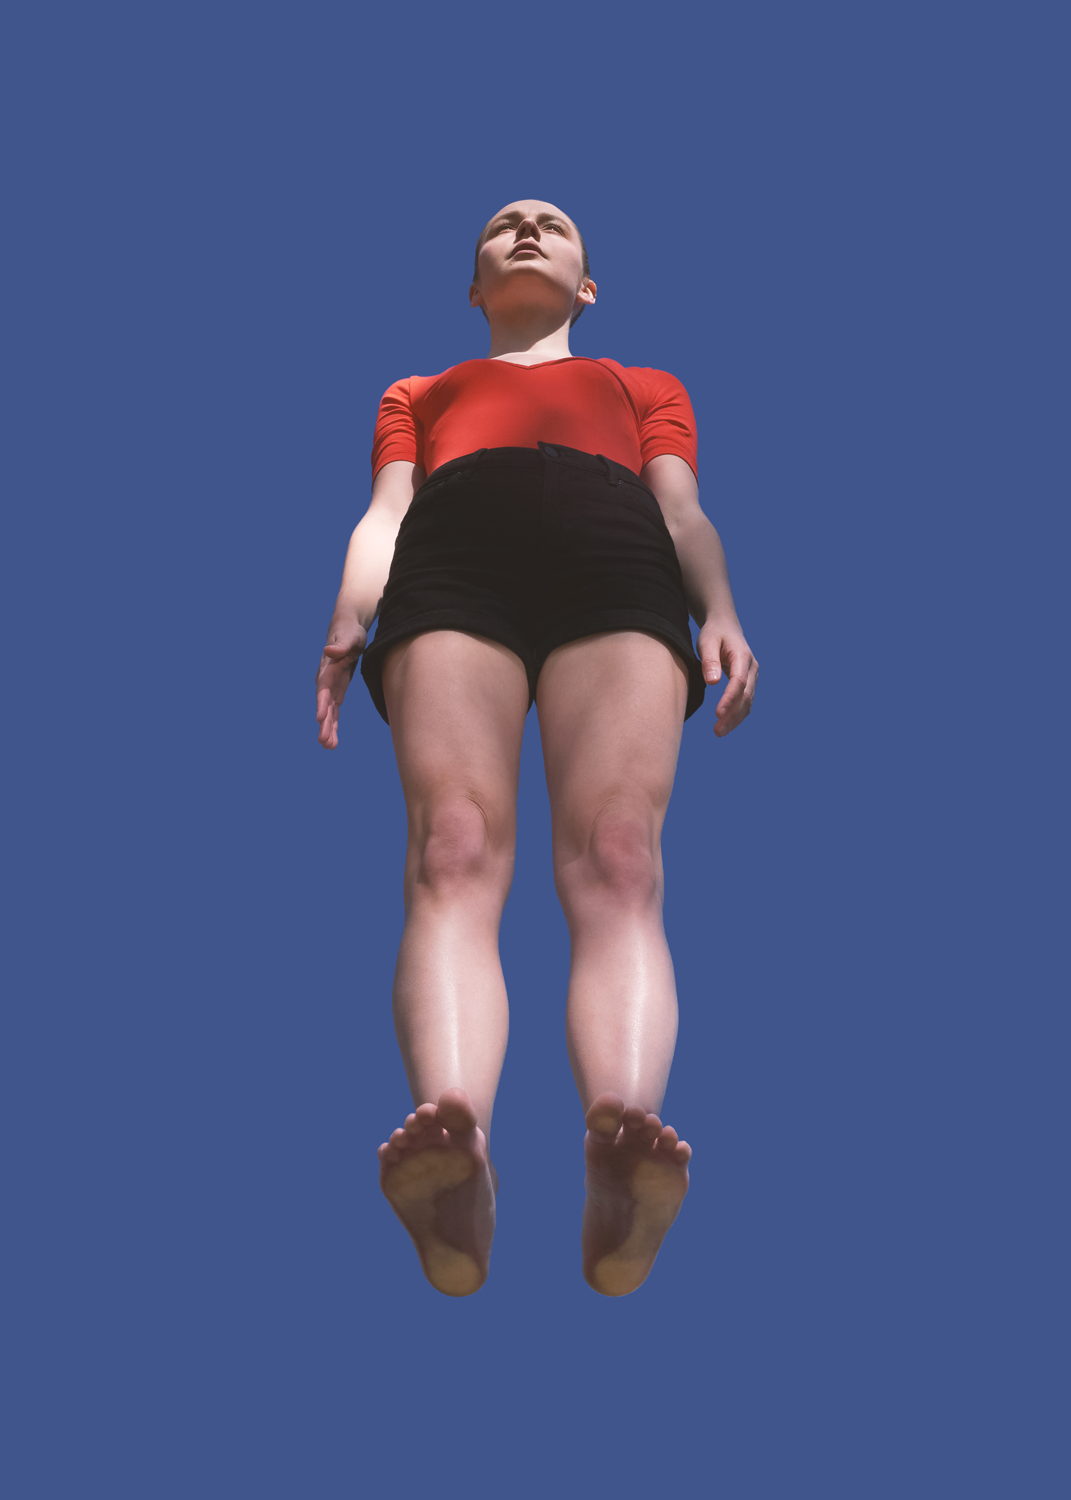 Colour video still of woman in red top and black shorts. Woman stand on perspex as video is taken from below.